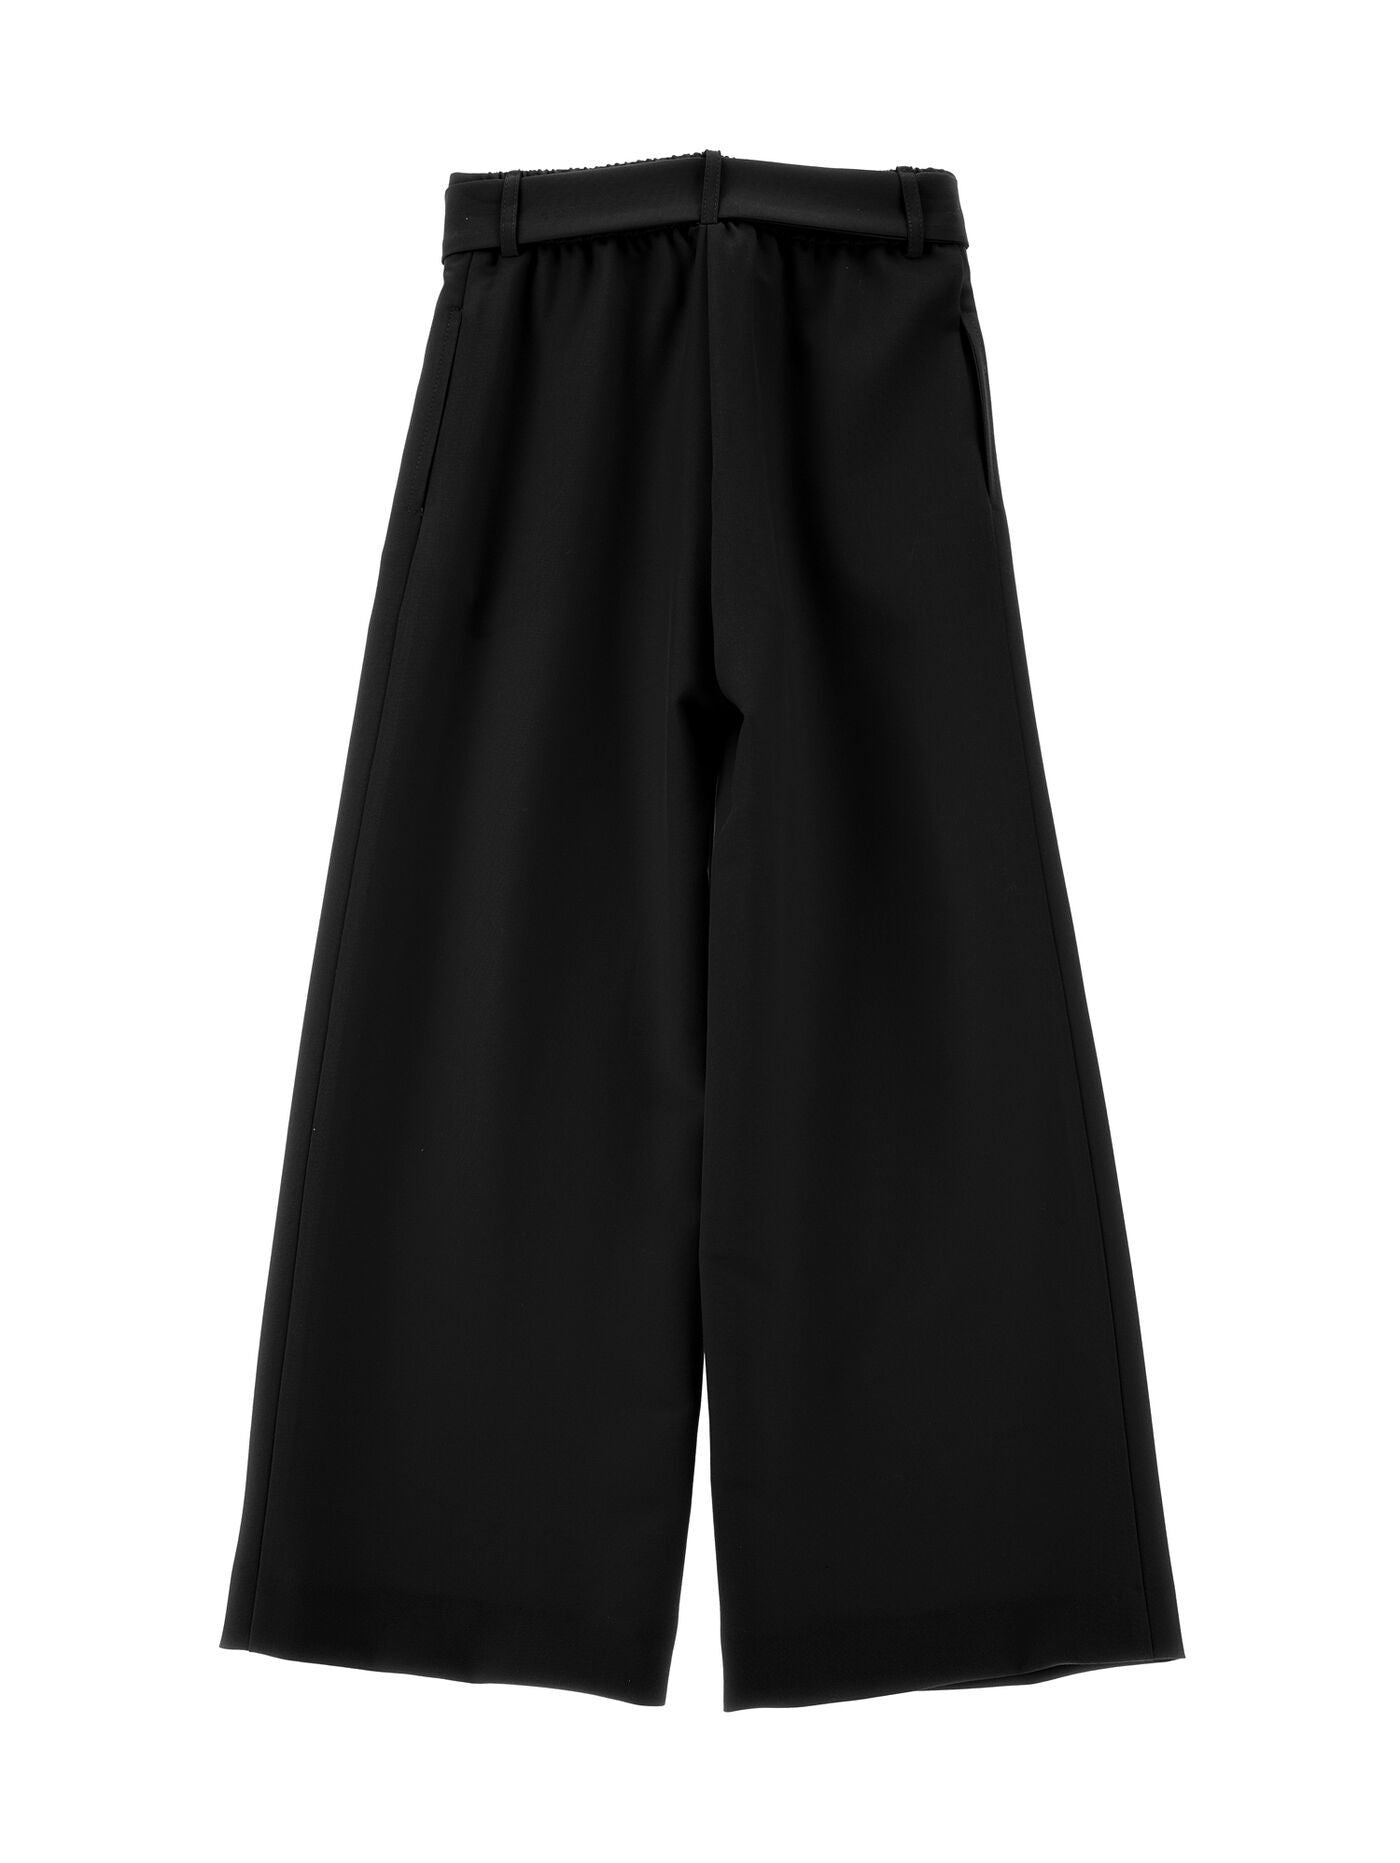 Monnalisa lightweight trousers with jewel button